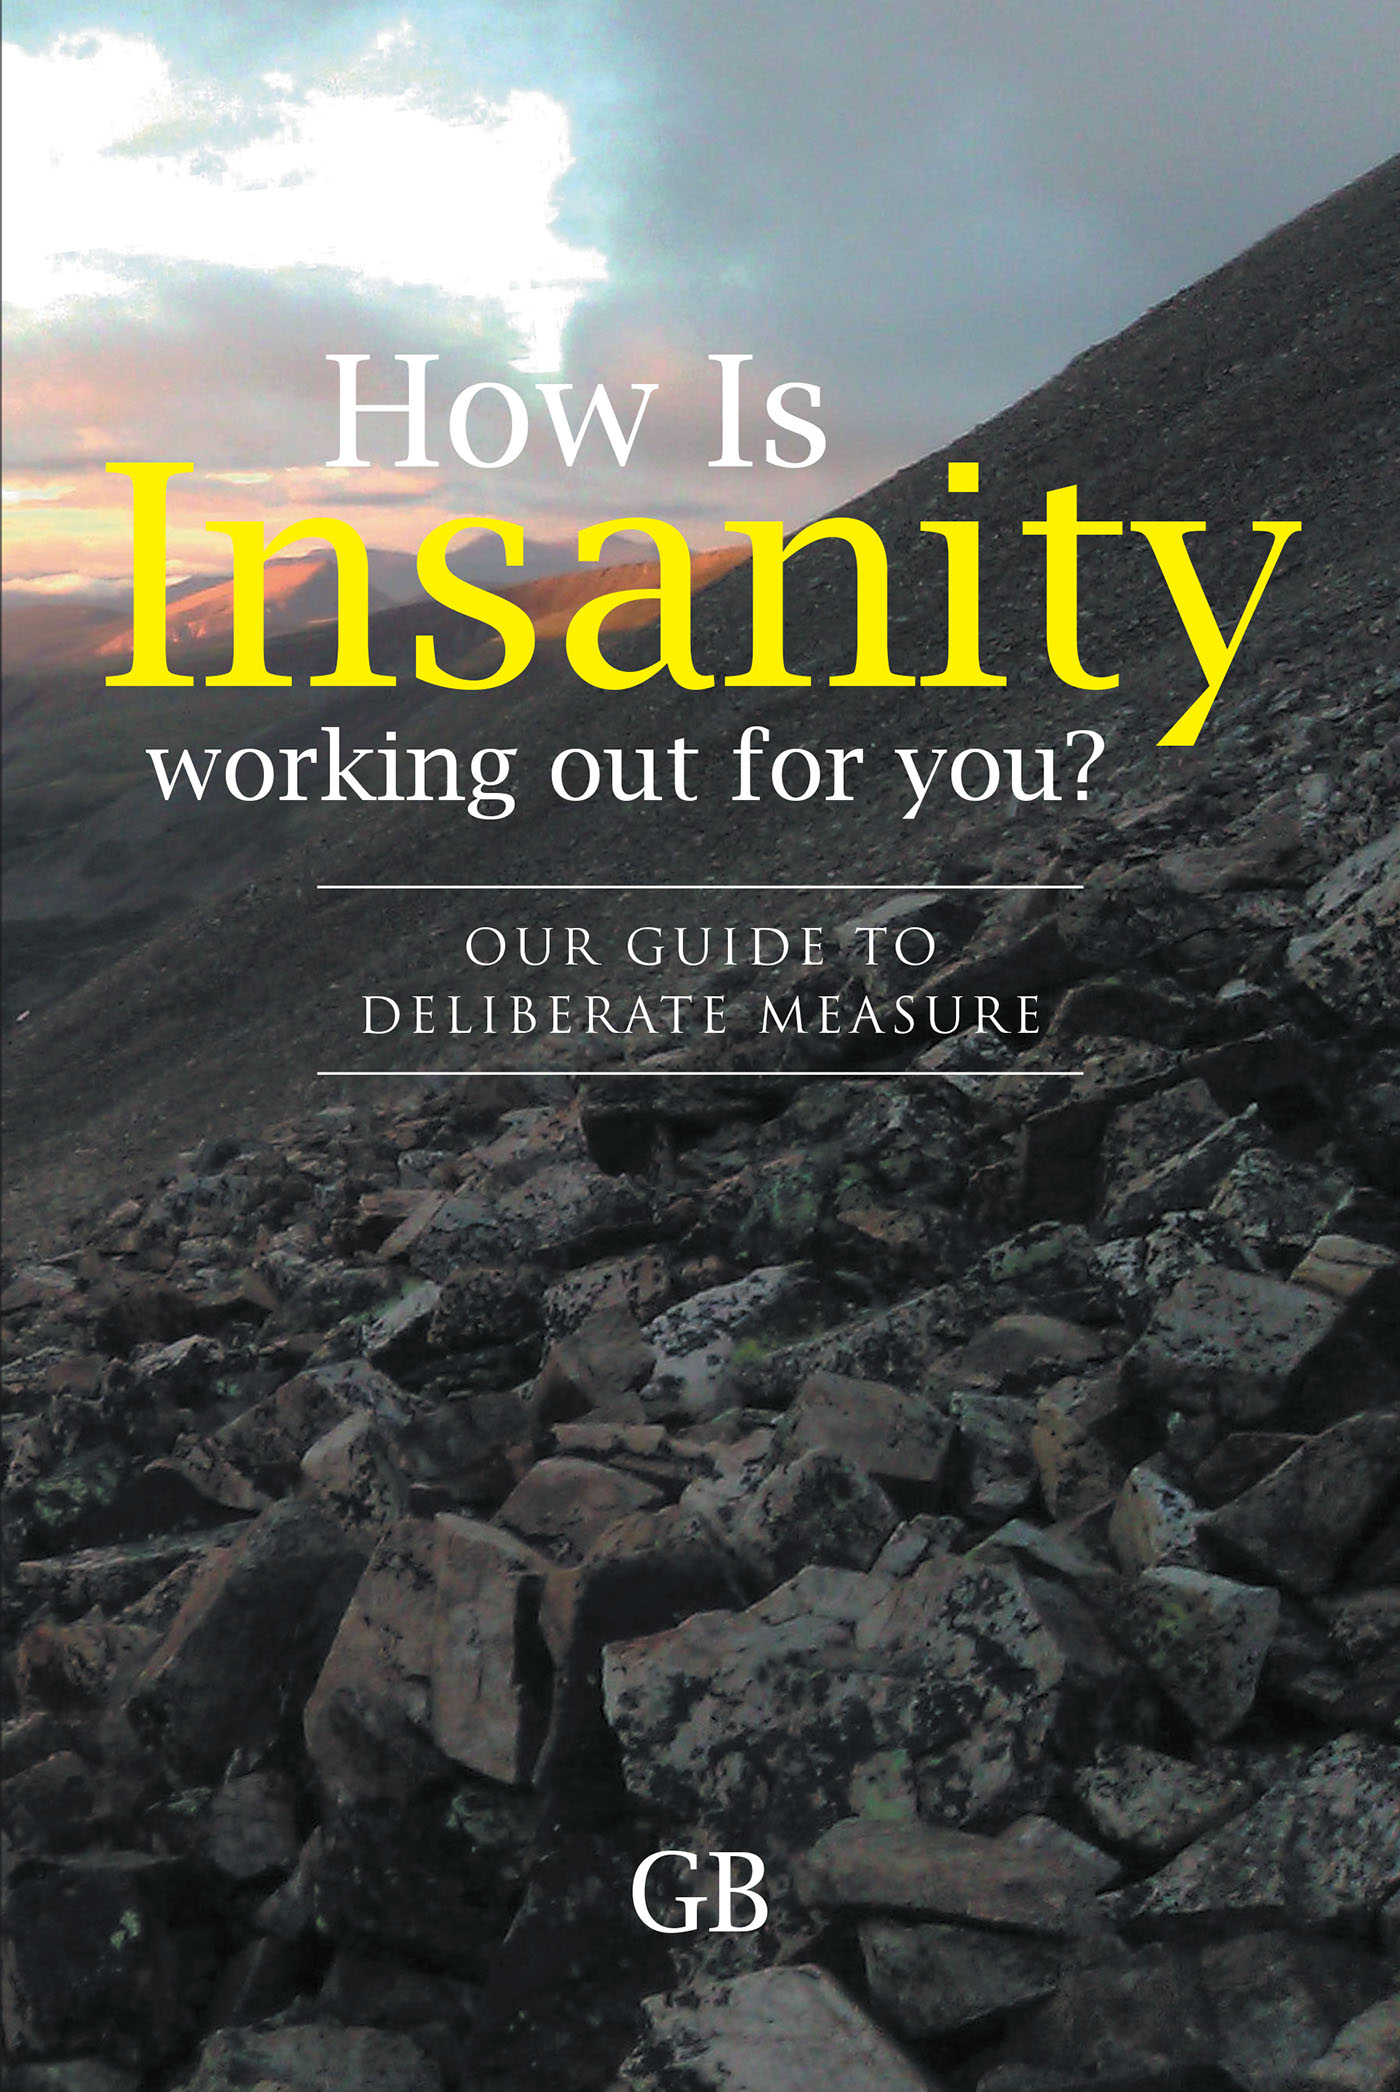 Author GB’s New Book, “How Is Insanity Working Out for You? Our Guide to Deliberate Measure,” is a Critical Discussion of Cultural Issues in Twenty-First Century America